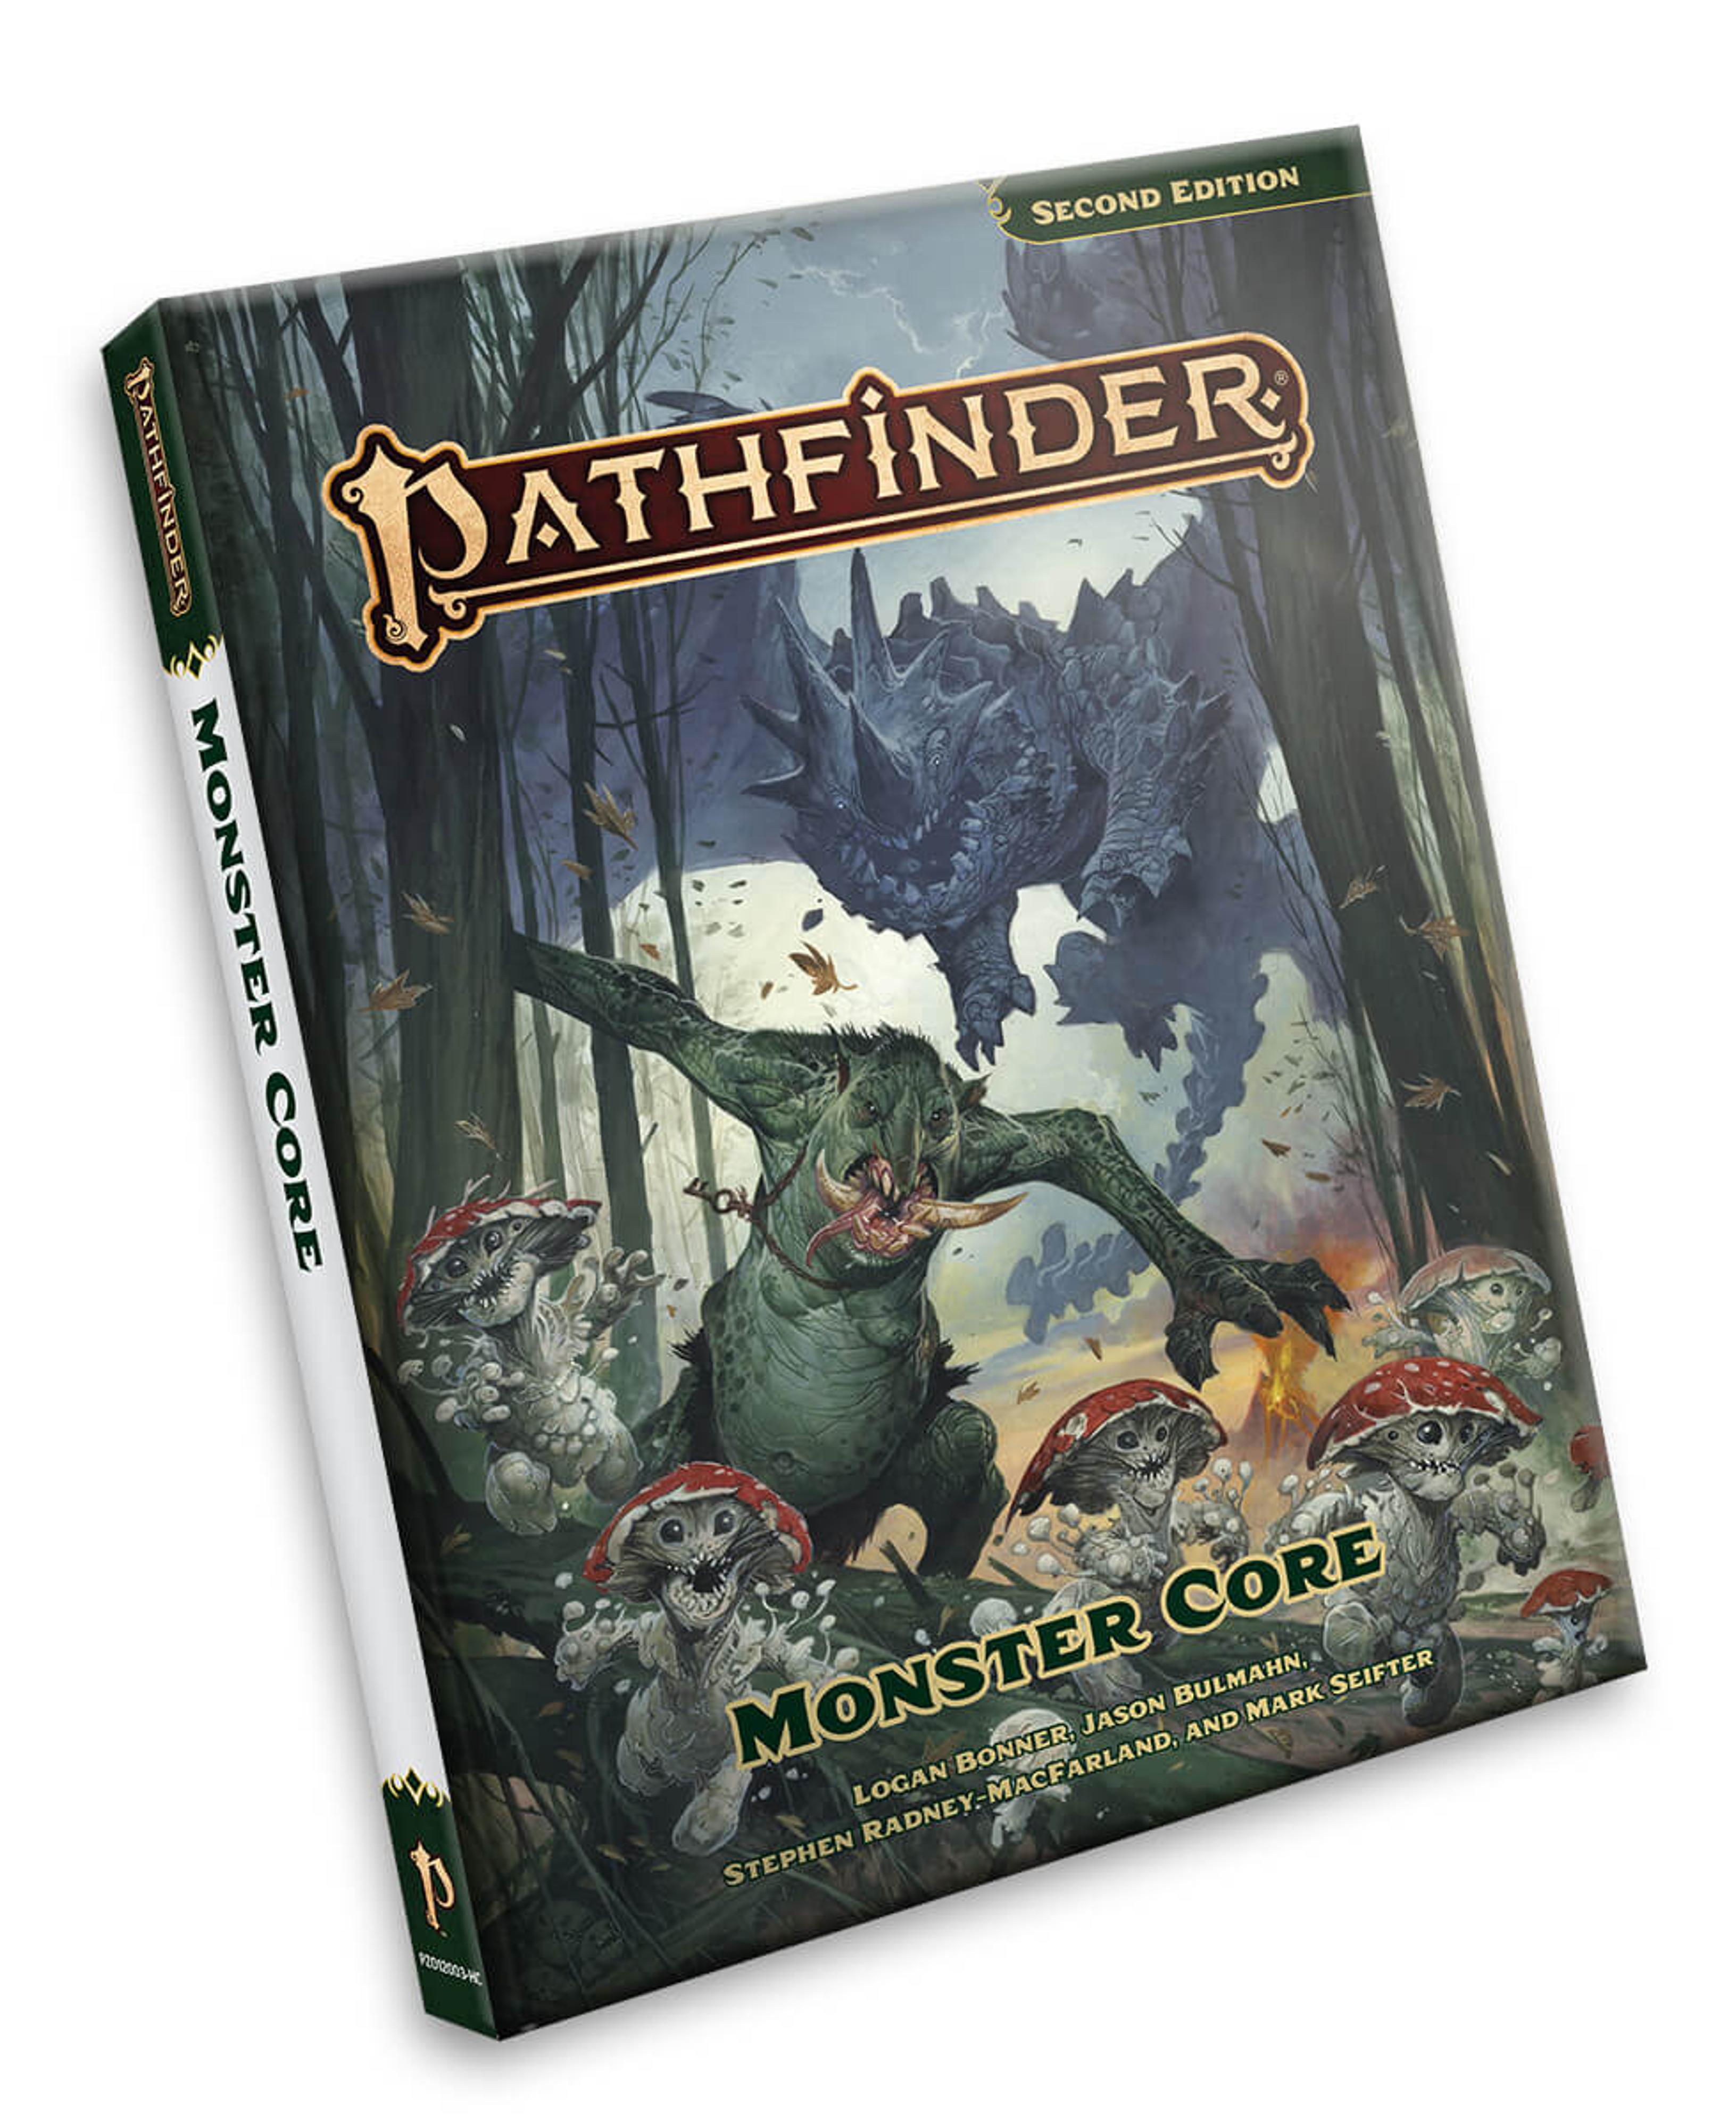 Pathfinder 2nd Edition Monster Core